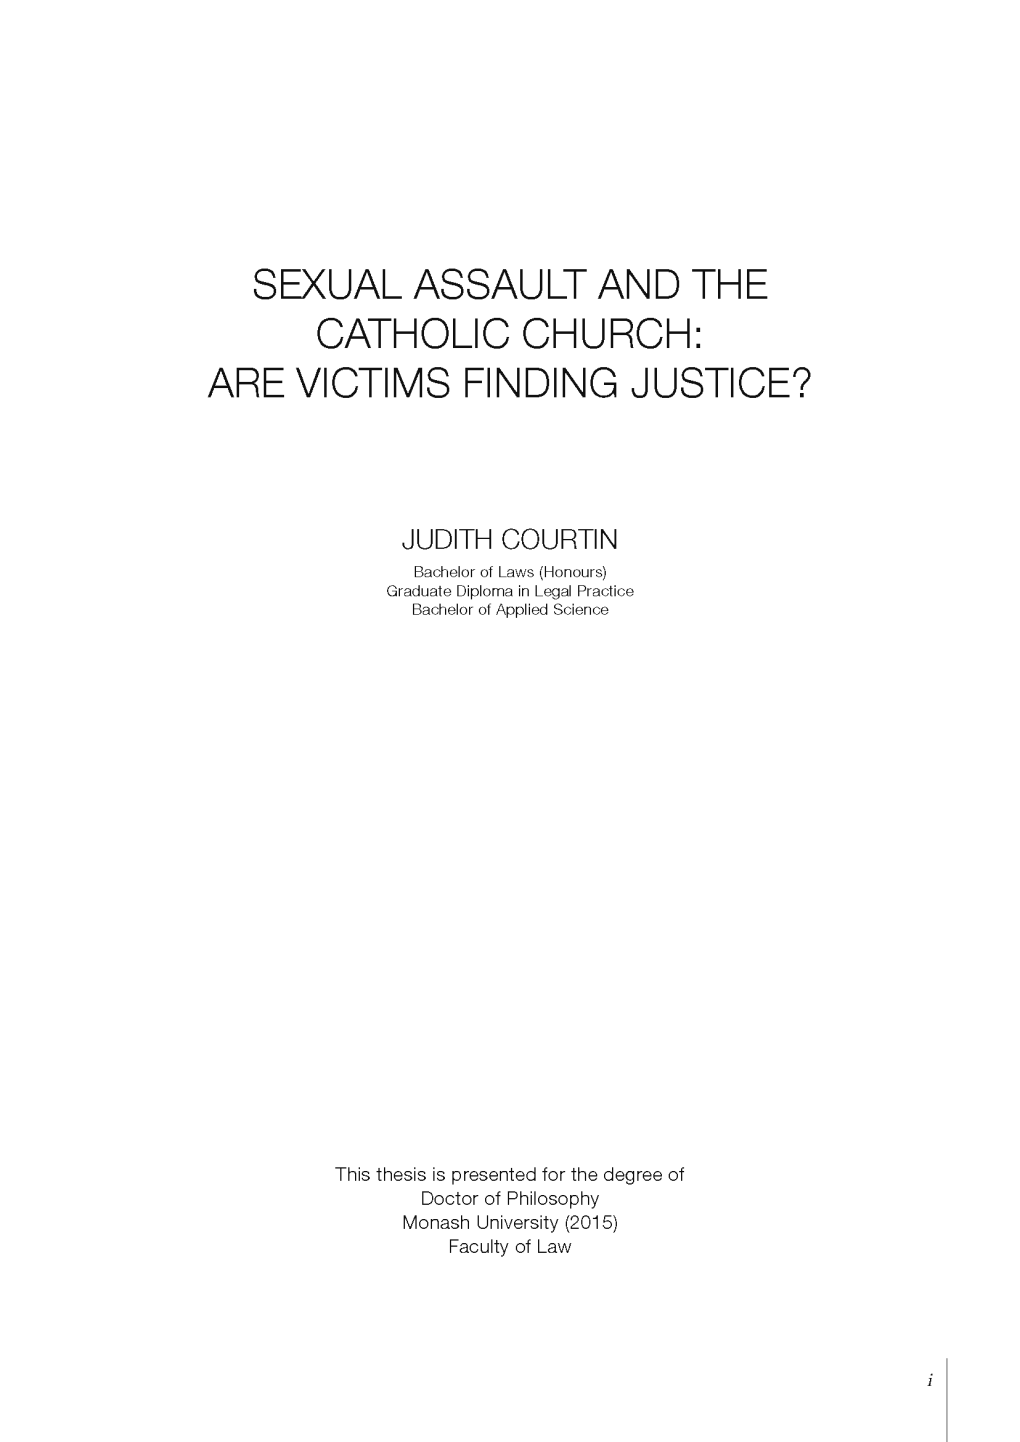 Sexual Assault and the Catholic Church: Are Victims Finding Justice?